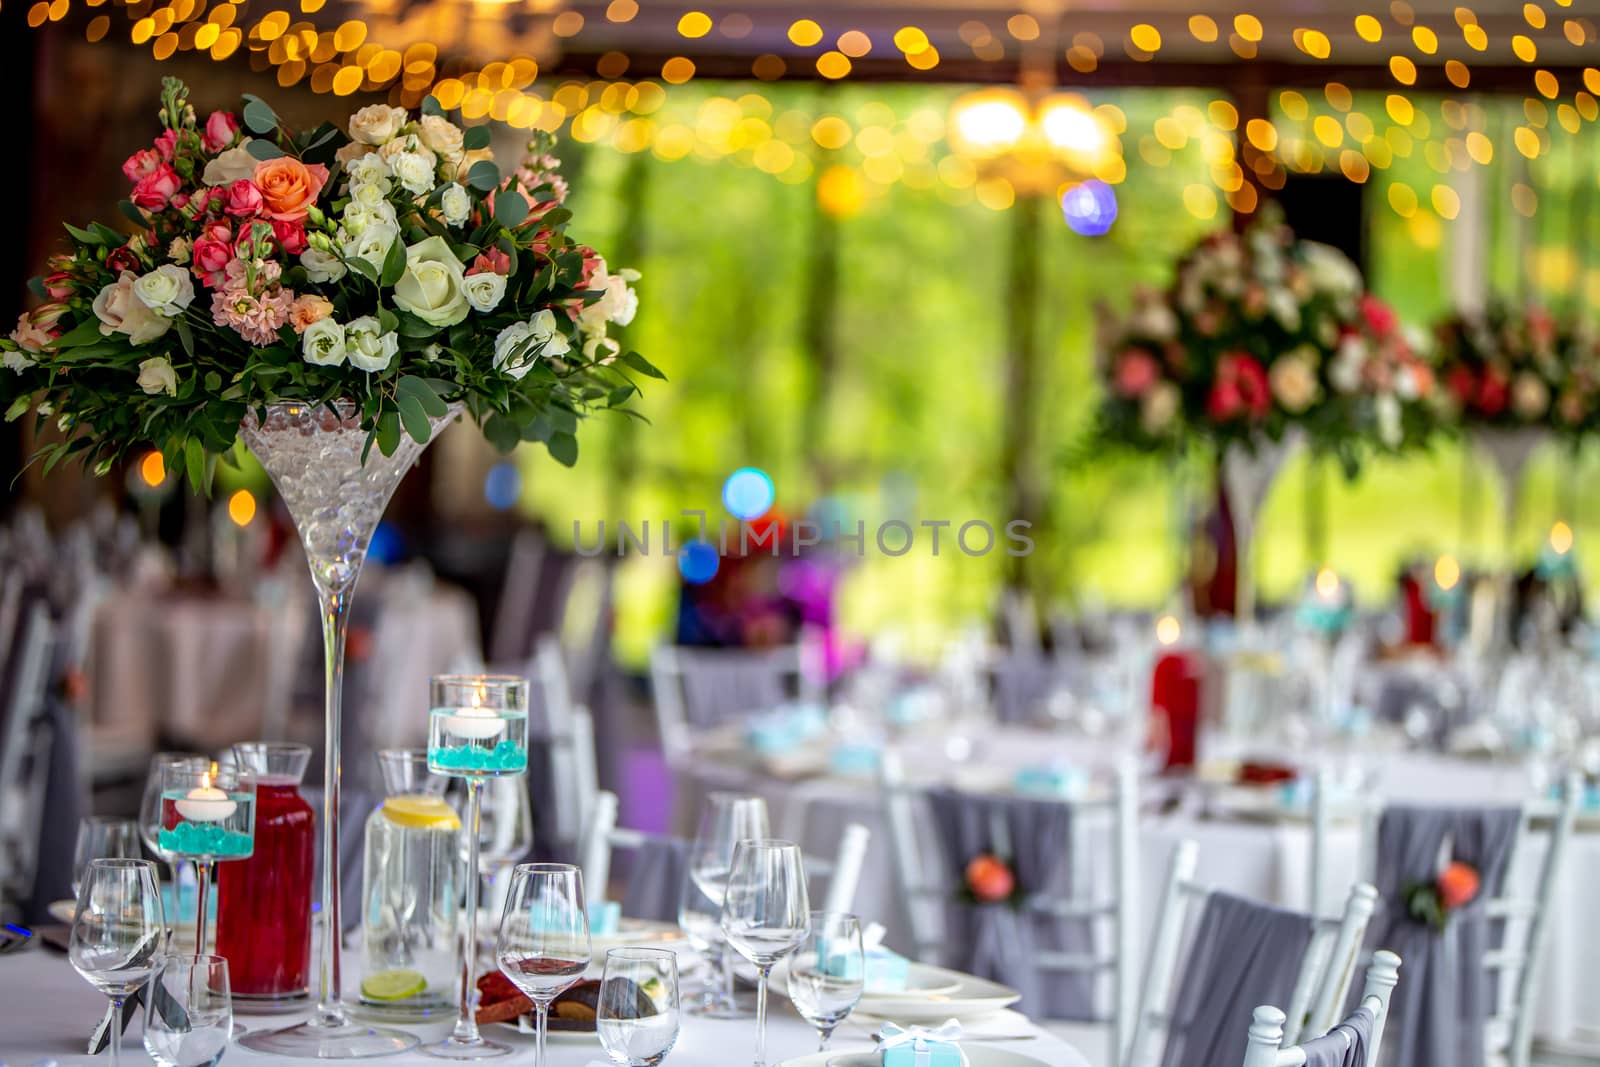 Wedding table decorated with flowers and dishes by fotorobs